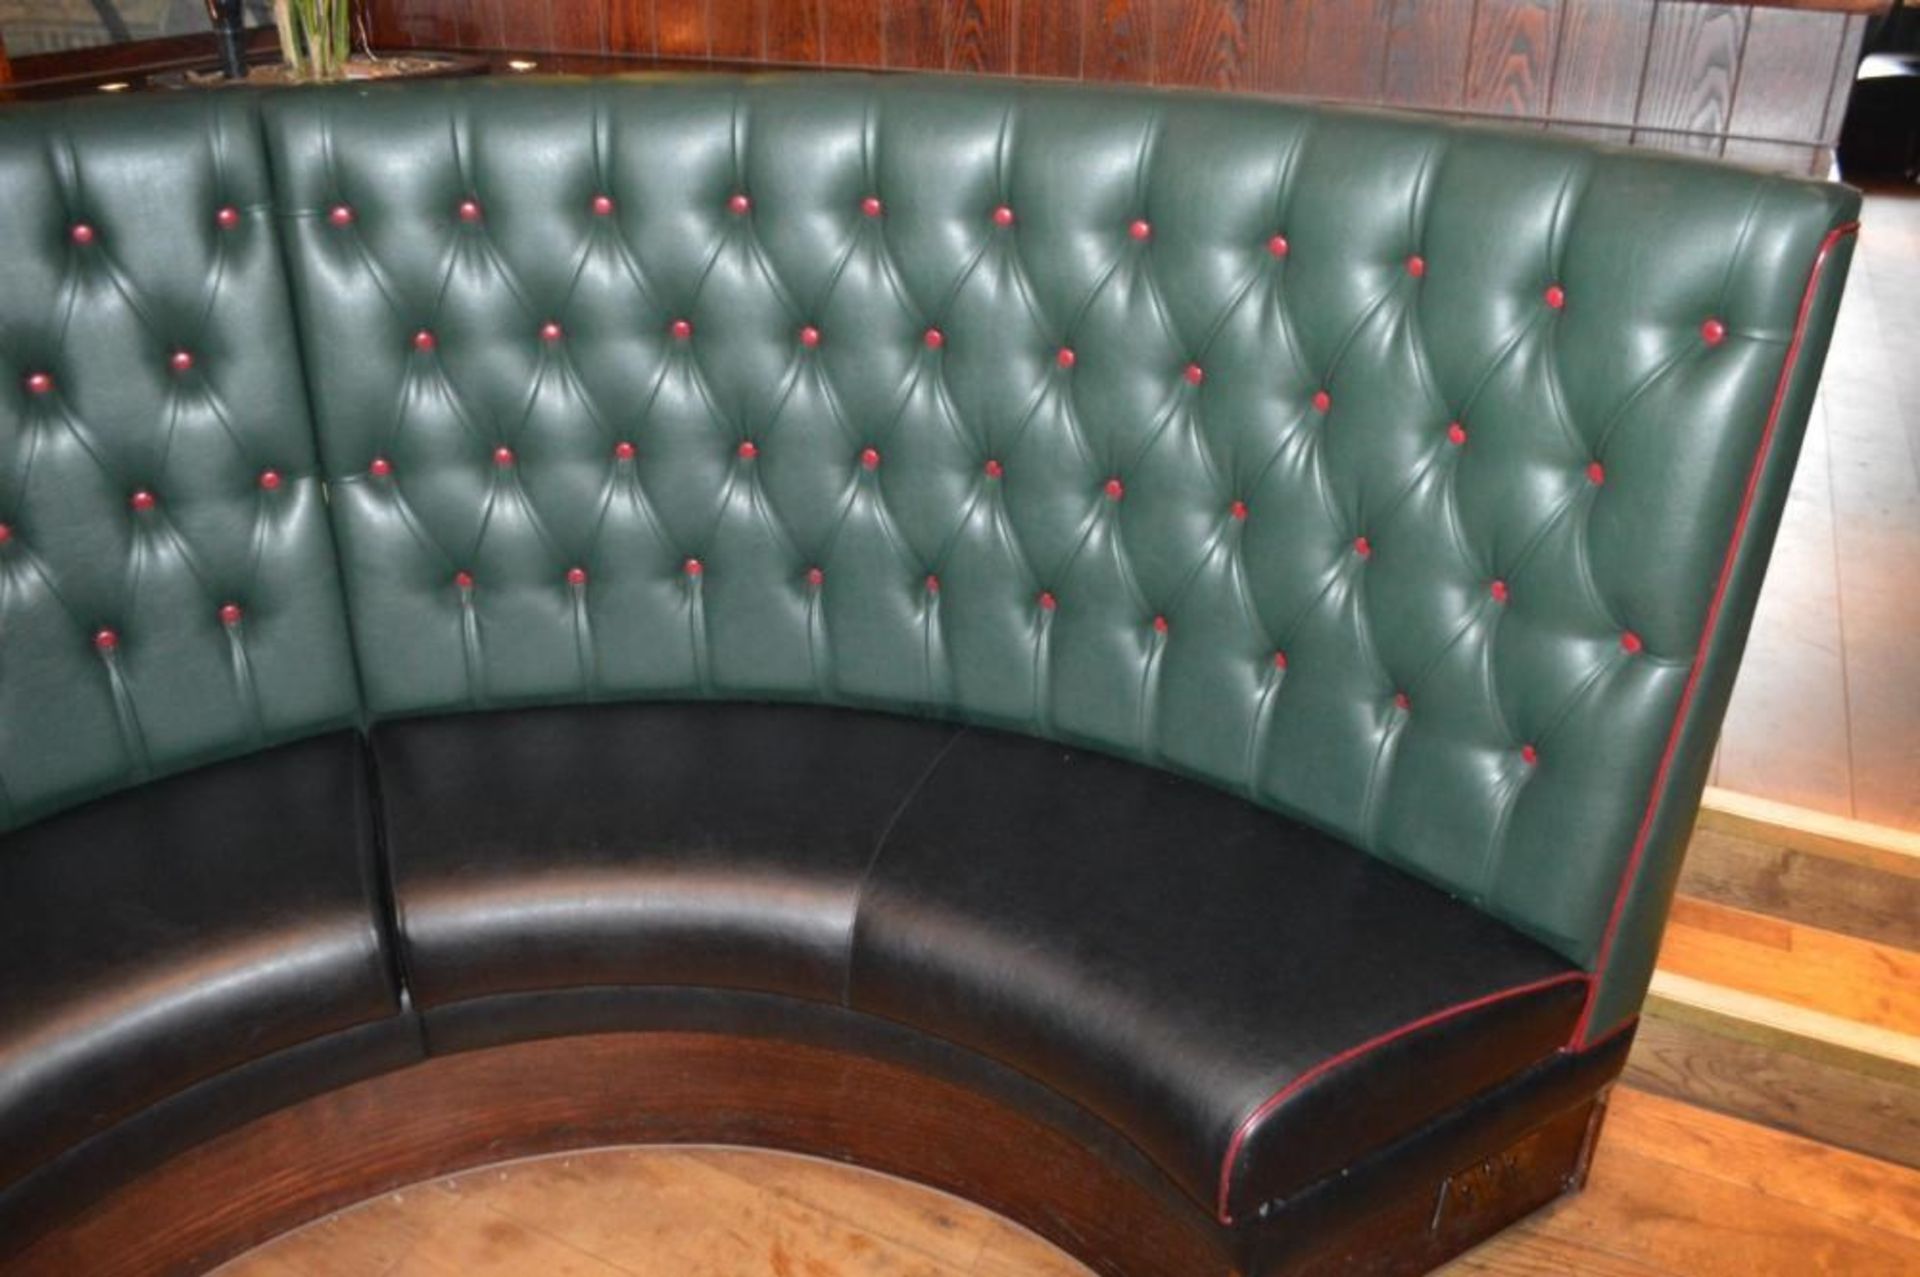 1 x Contemporary U Shape Seating Booth - Features a Leather Upholstery With Green Studded Backrests, - Image 6 of 10